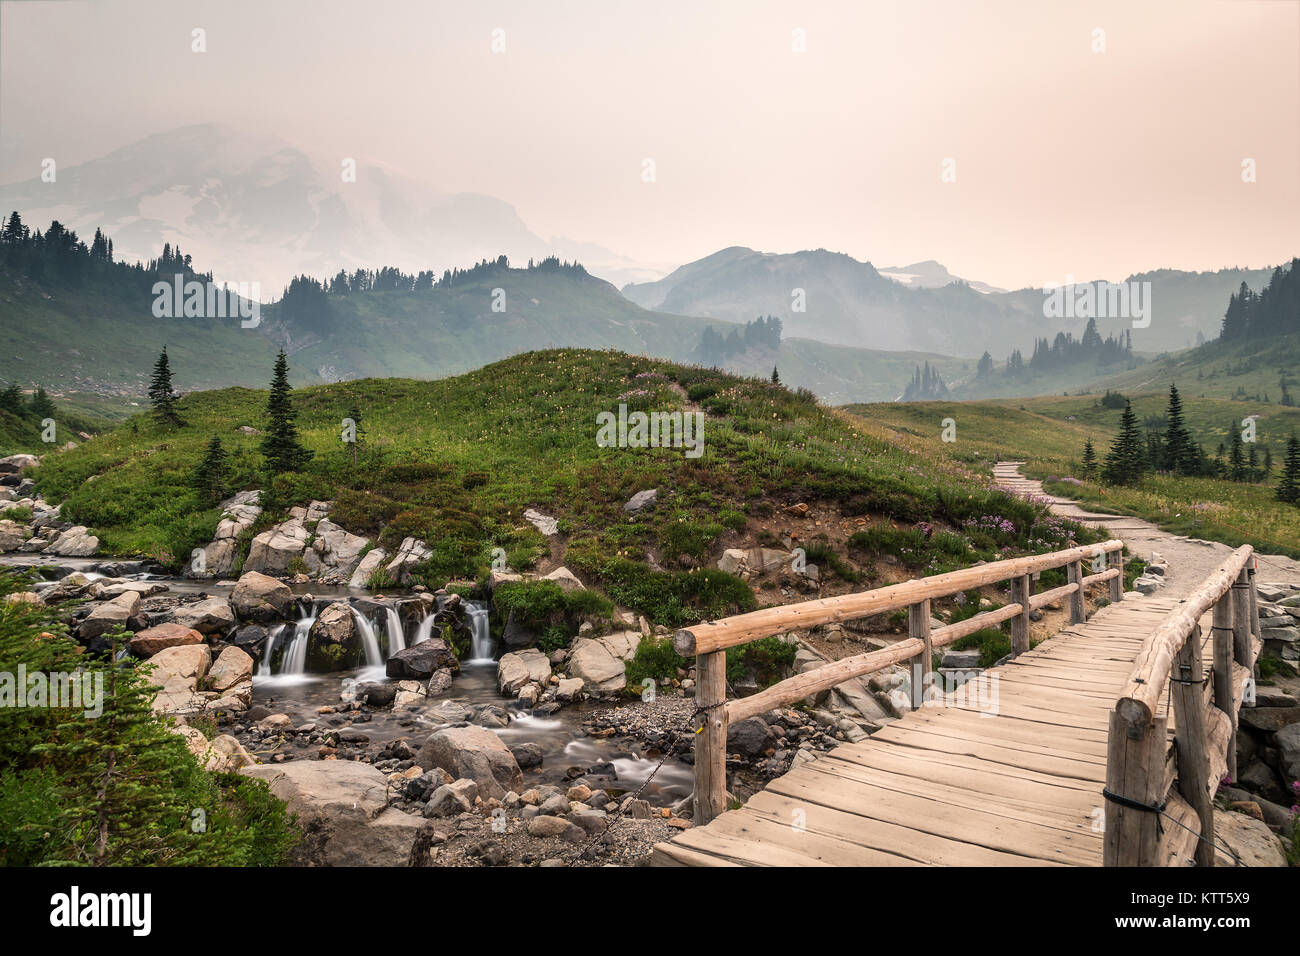 Hiking path at Mt. Rainier National Park with wildfires nearby, Washington, United States Stock Photo